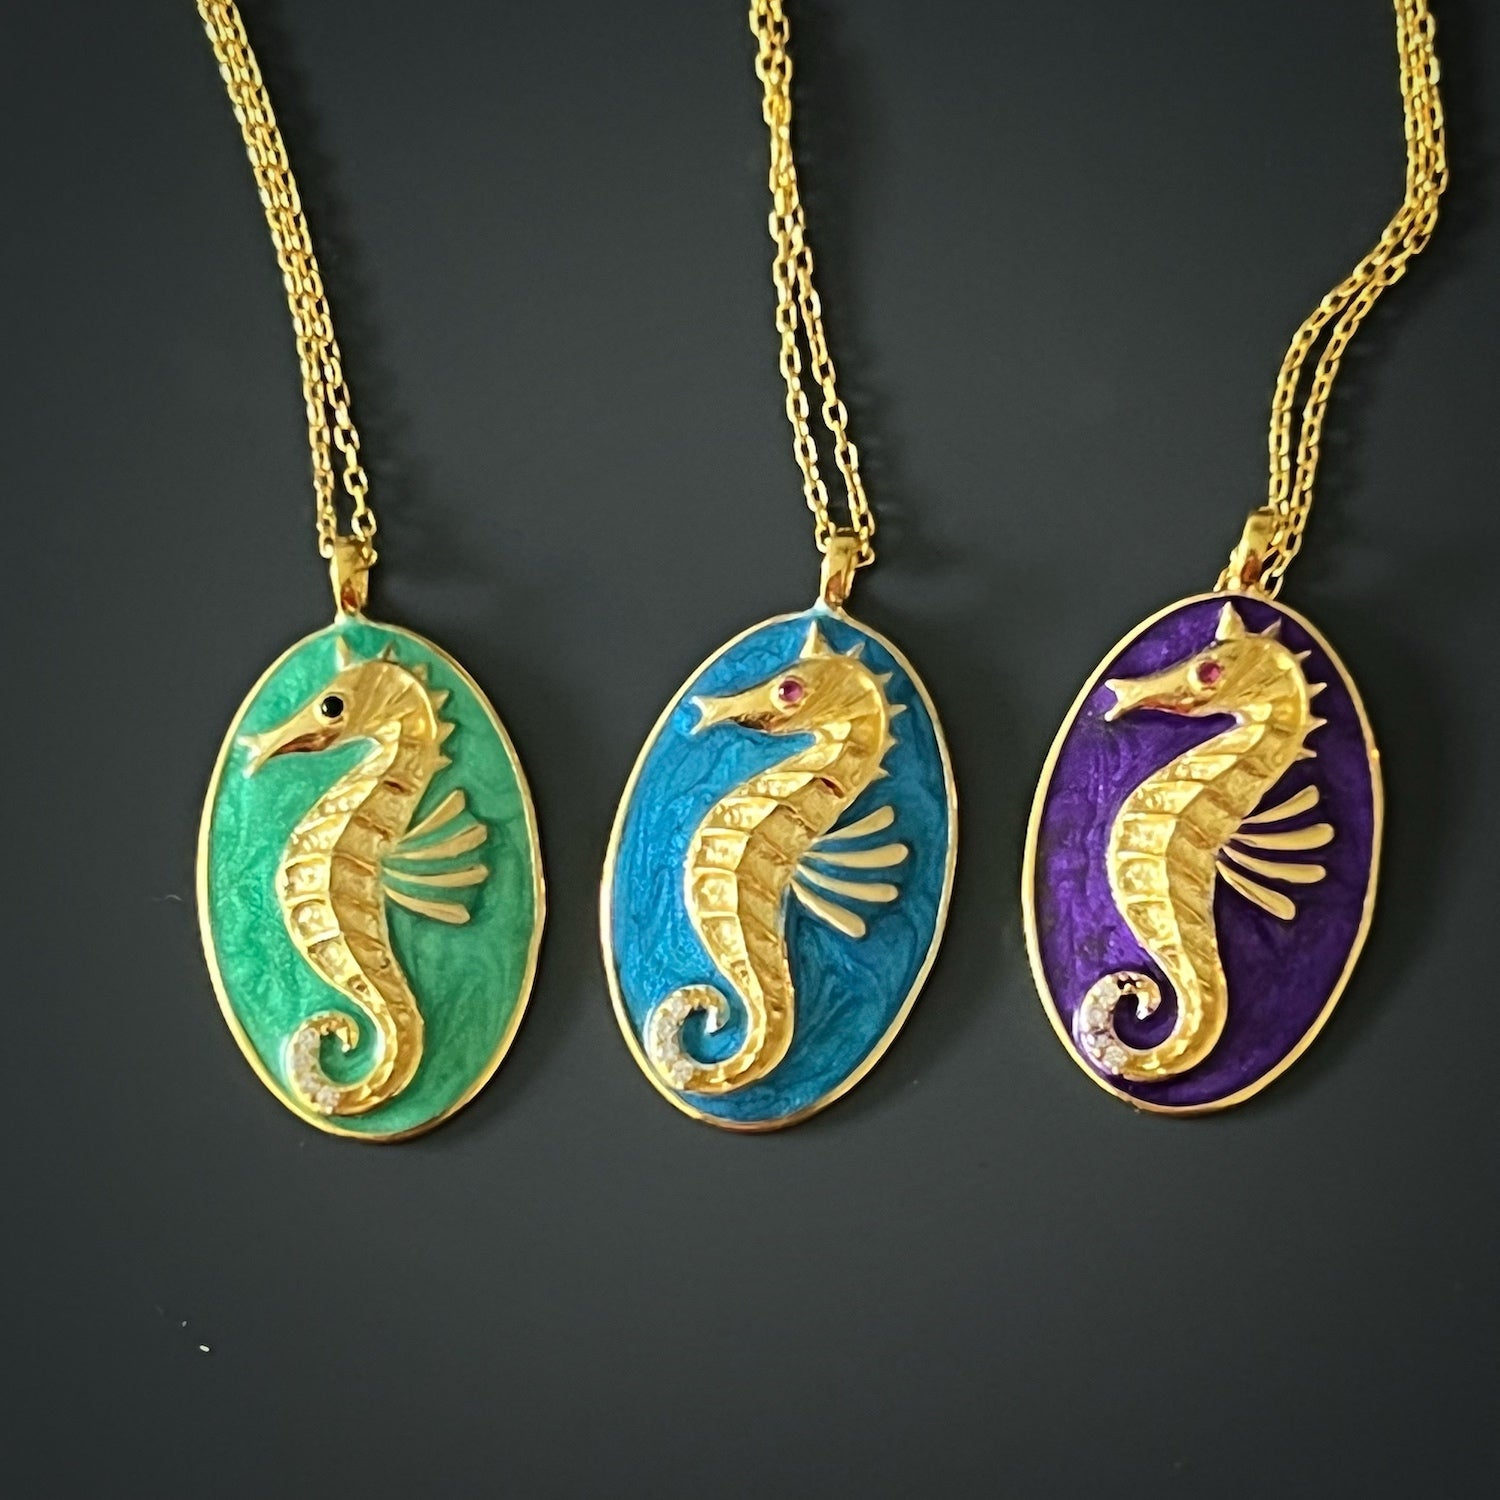 The Spirit Animal Blue Seahorse Necklace, a versatile and eye-catching piece that serves as a reminder of inner strength and protection.